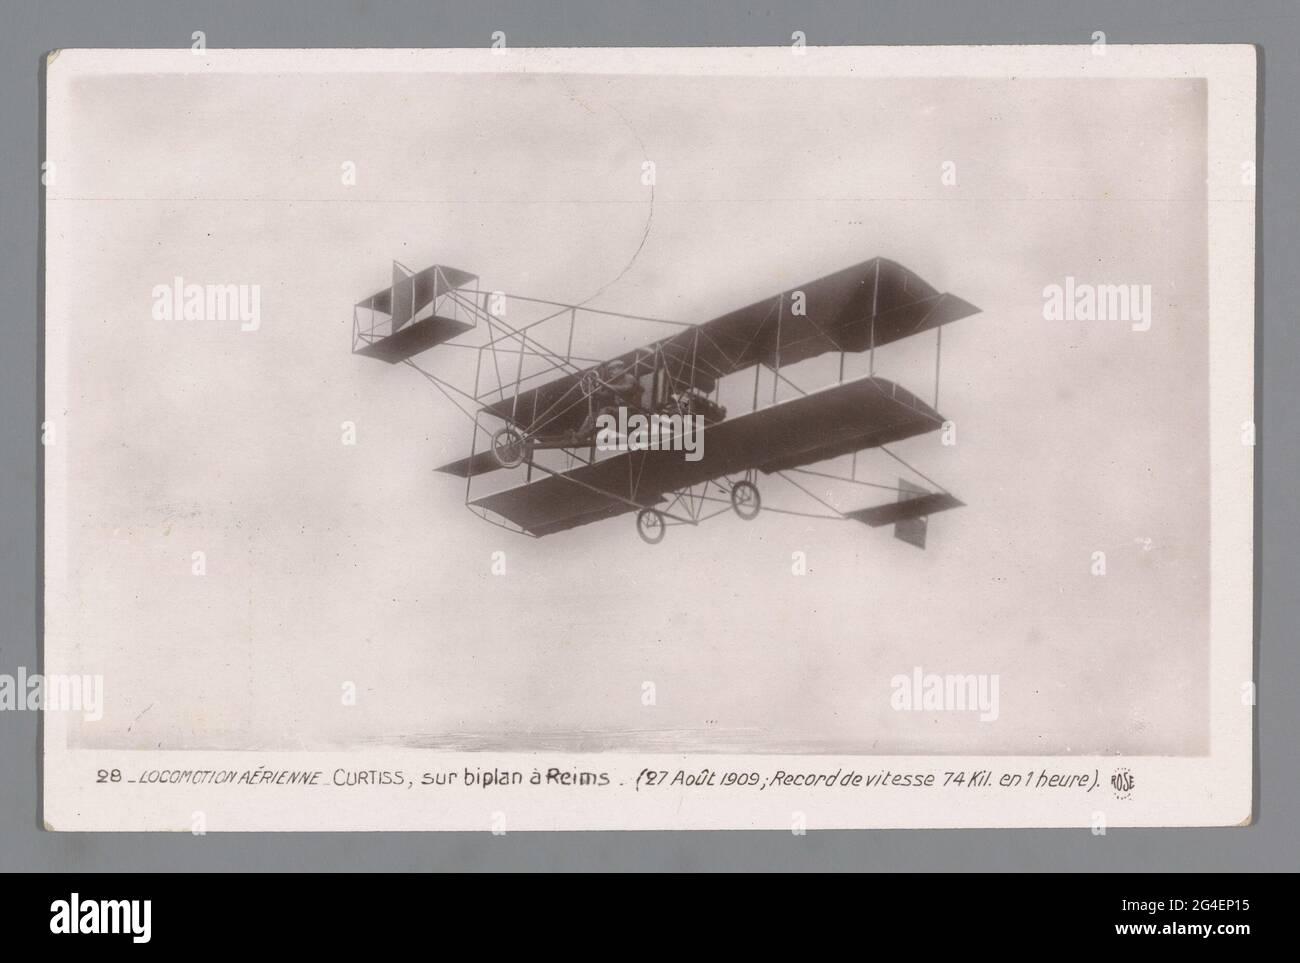 Glenn Curtiss in Zijn Vliegtuig te reims; Curtiss aerial locomotion, on biplane in Reims (27 August 1909, speed record 74 killy in 1 hour). . Stock Photo